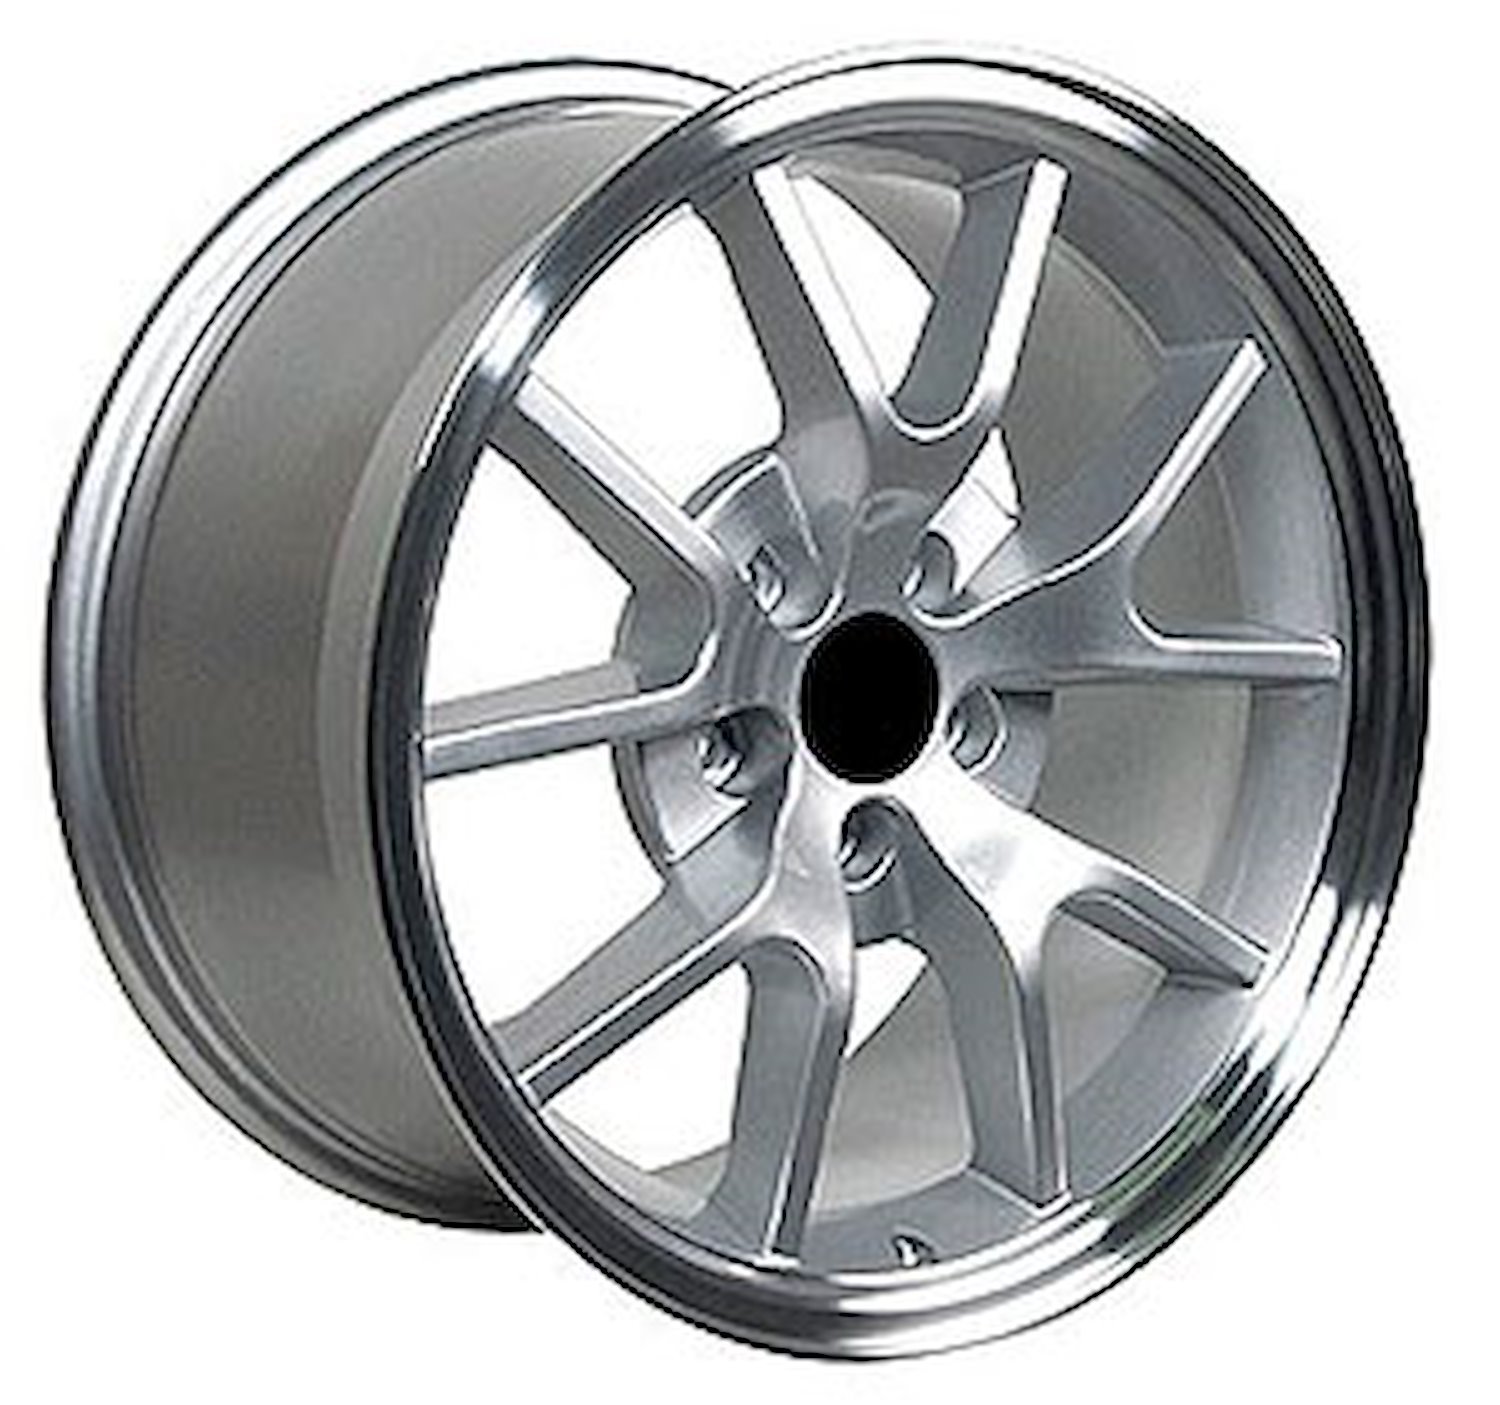 Mustang FR500 Style Wheel Size: 18" x 9" Bolt Pattern: 5 x 114.3 Rear Spacing: 5.94" Offset: +24mm